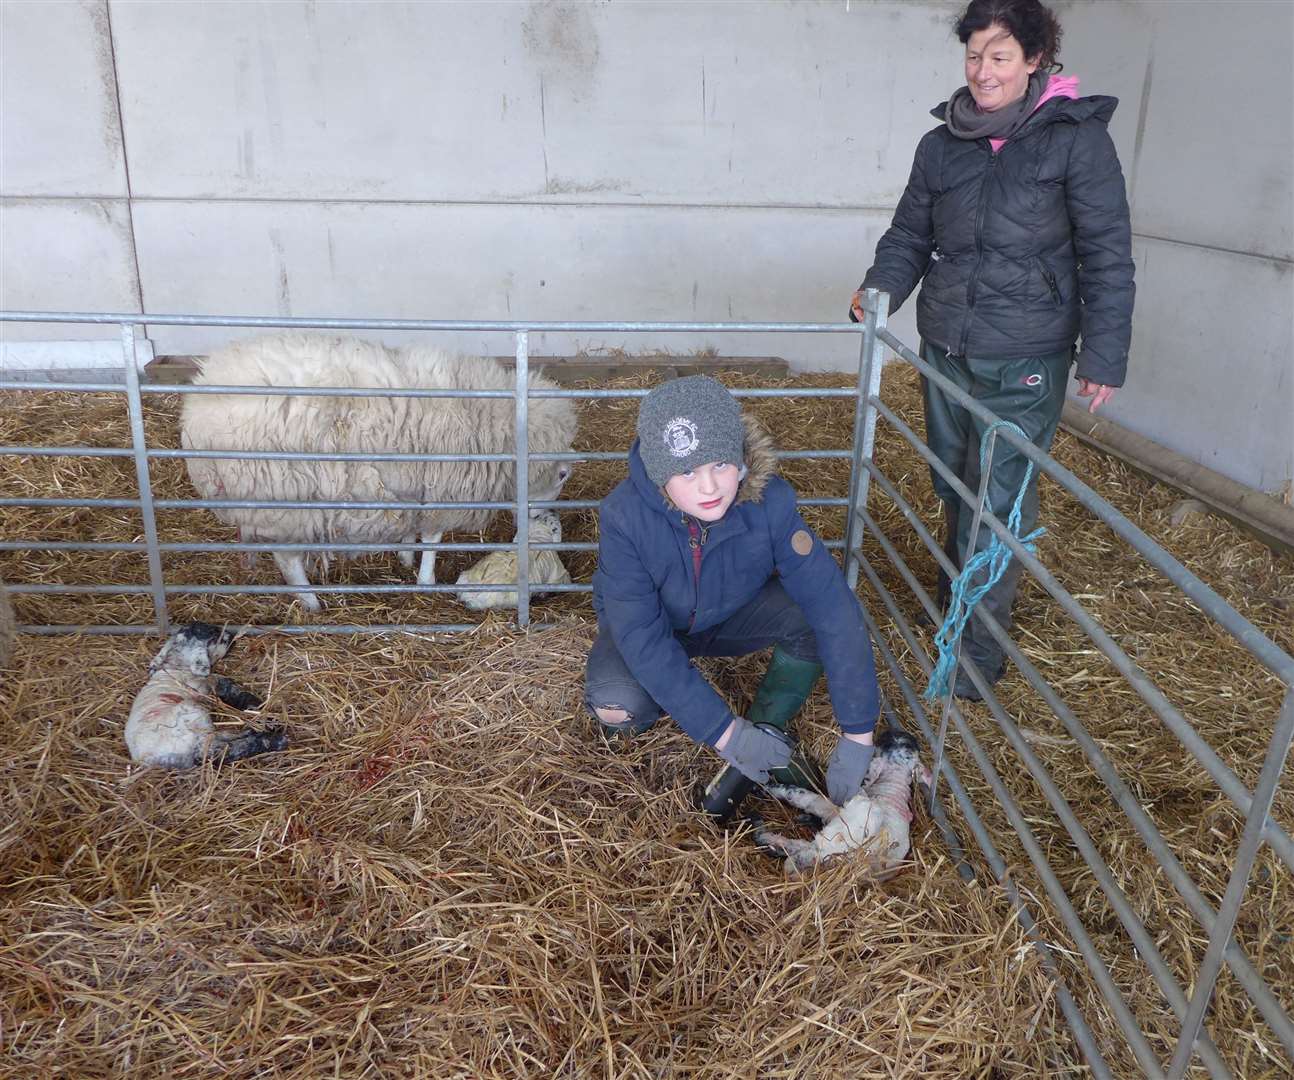 Nine-year-old Kyle applies some iodine naval spray to the first lamb born this year from the 140 ewes at Toftcarl Farm under the watchful eye of his mother Hilda.